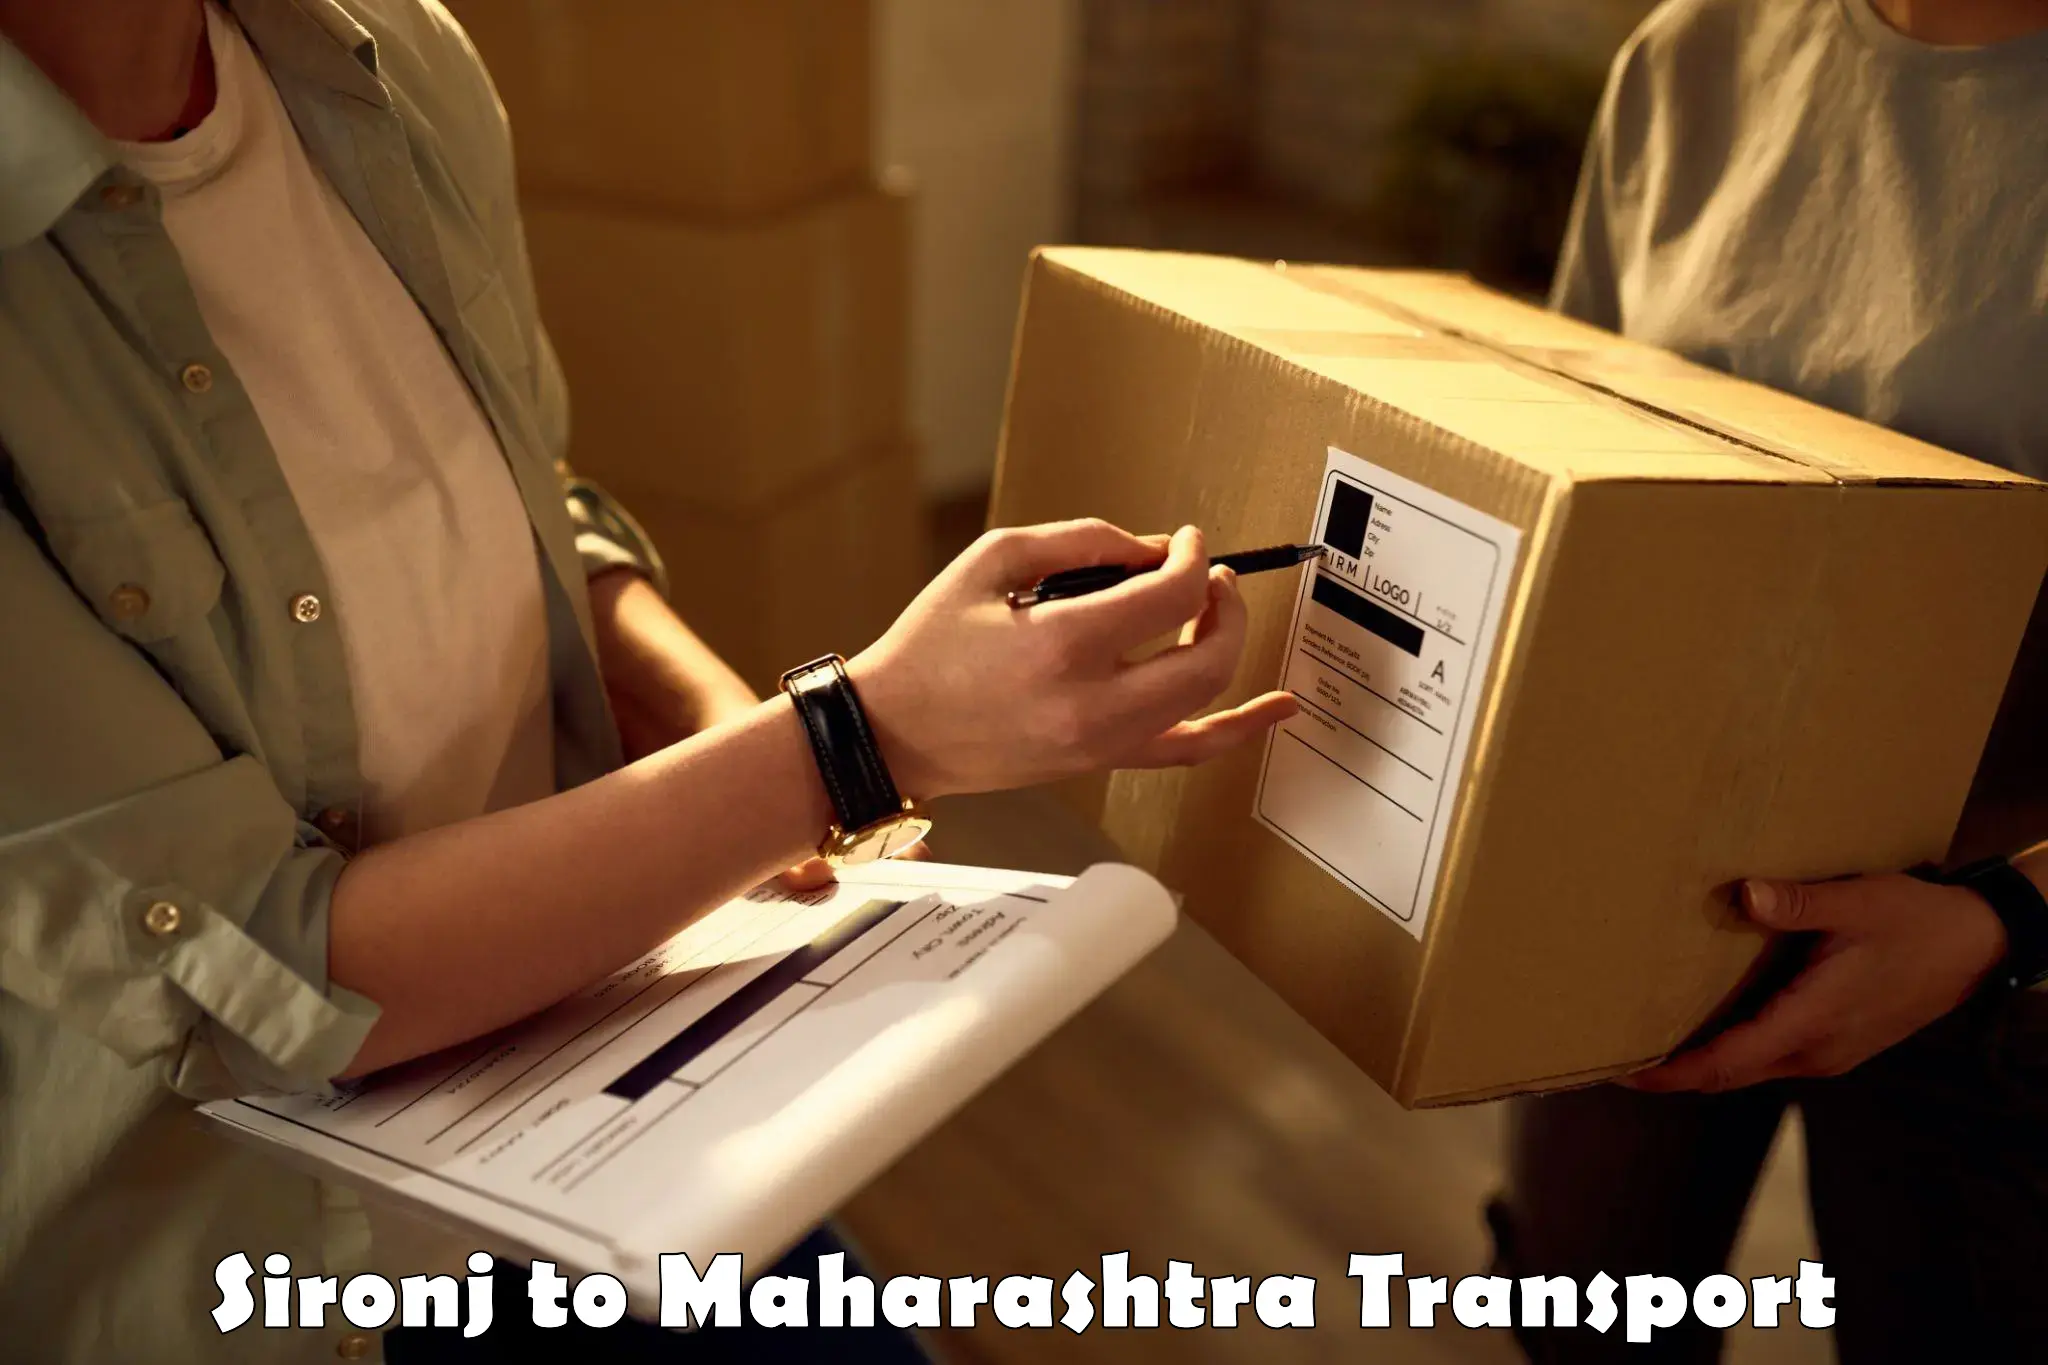 Road transport online services Sironj to Nagothane